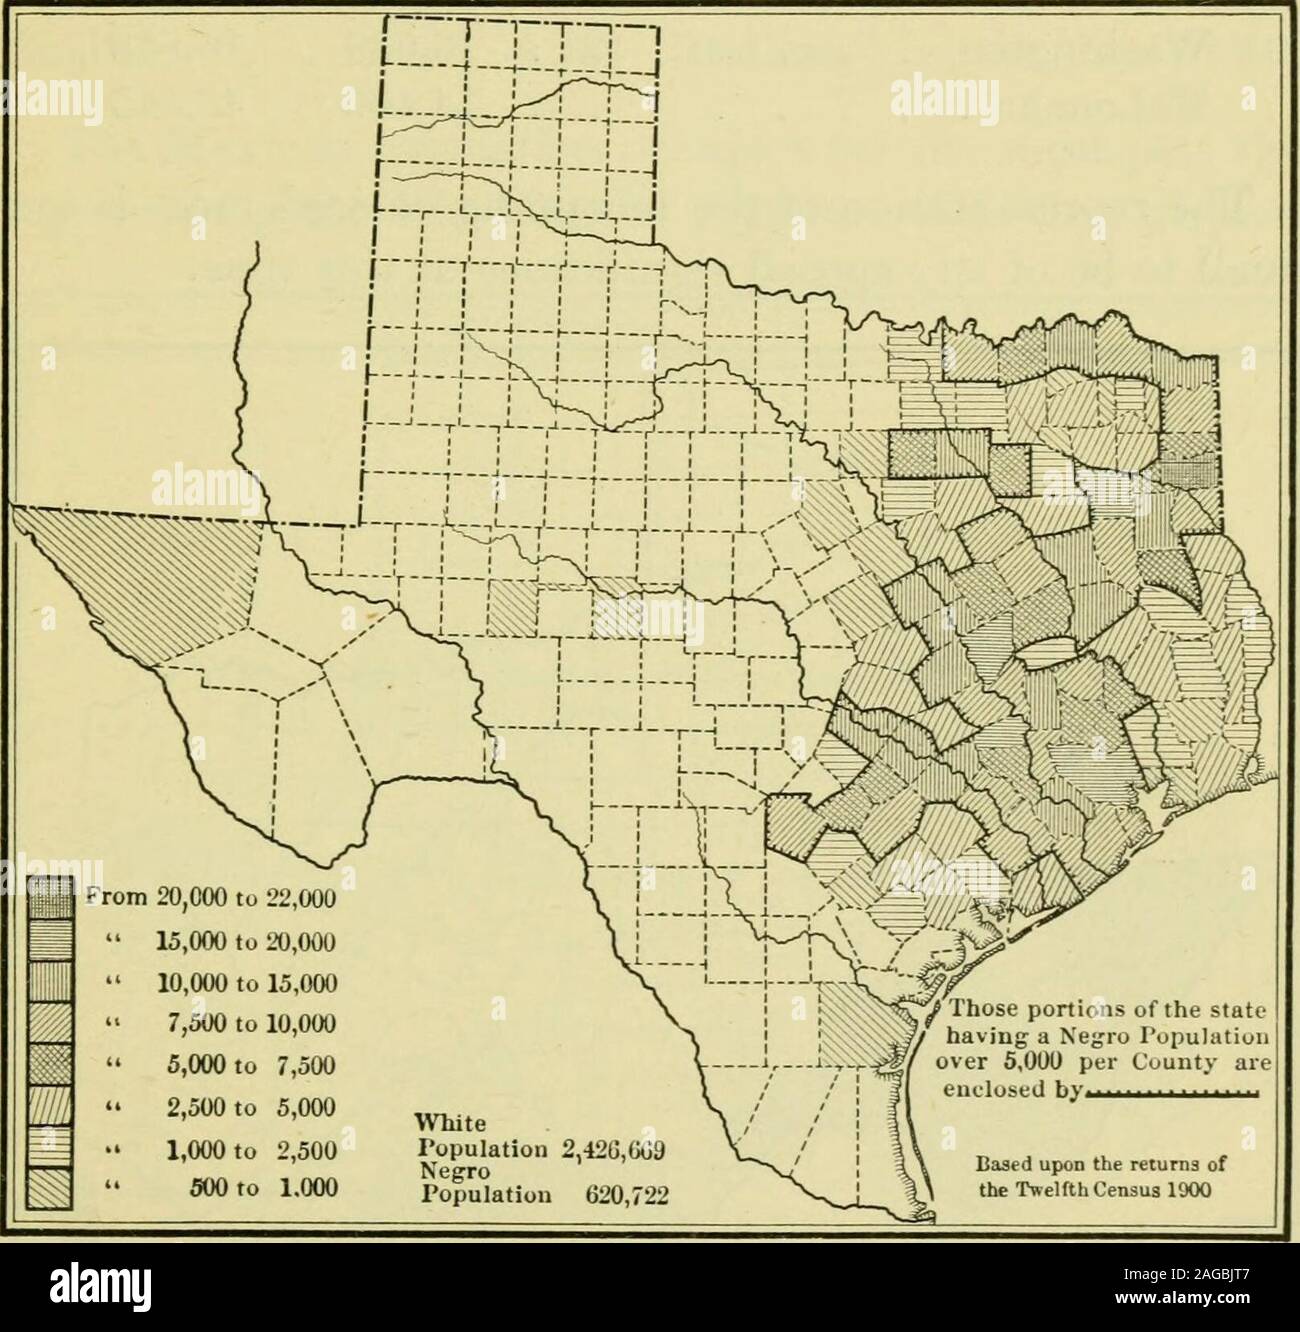 . The geography of Texas, physical and political. population (amounting to 2,249,088), 1,514,262 were bornin Texas. The remainder, 734,826, are, of course, nativesof other states and territories. The twelve states makingthe largest contributions are: Tennessee . . 121,573 Kentucky . . 43,995 Alabama . . 111,298 Louisiana . . 33,565 Mississippi . . 80,021 Illinois .... 24,995 Arkansas . . 69,068 North Carolina . 17,037 Georgia . . 66,213 South Carolina . 15,097 Missouri . . 49,134 Virginia. . . 14,673 Ohio and Indiana together furnished 21,764 ; New York,Pennsylvania, and New Jersey, 15,332; an Stock Photo